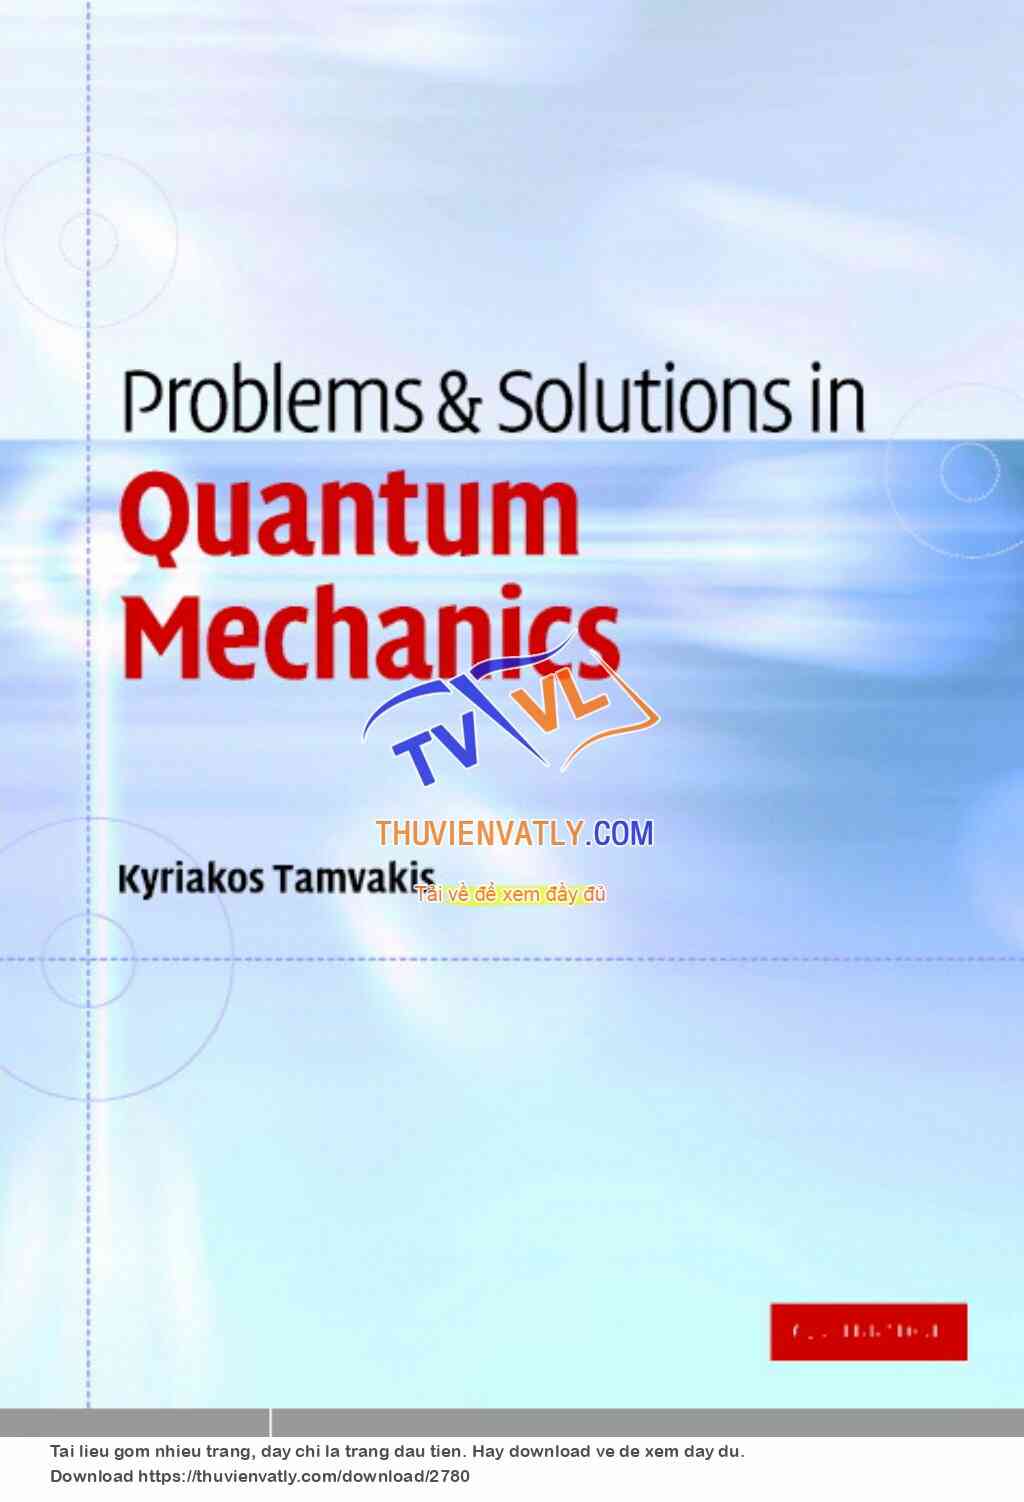 PROBLEMS AND SOLUTIONS IN QUANTUM MECHANICS